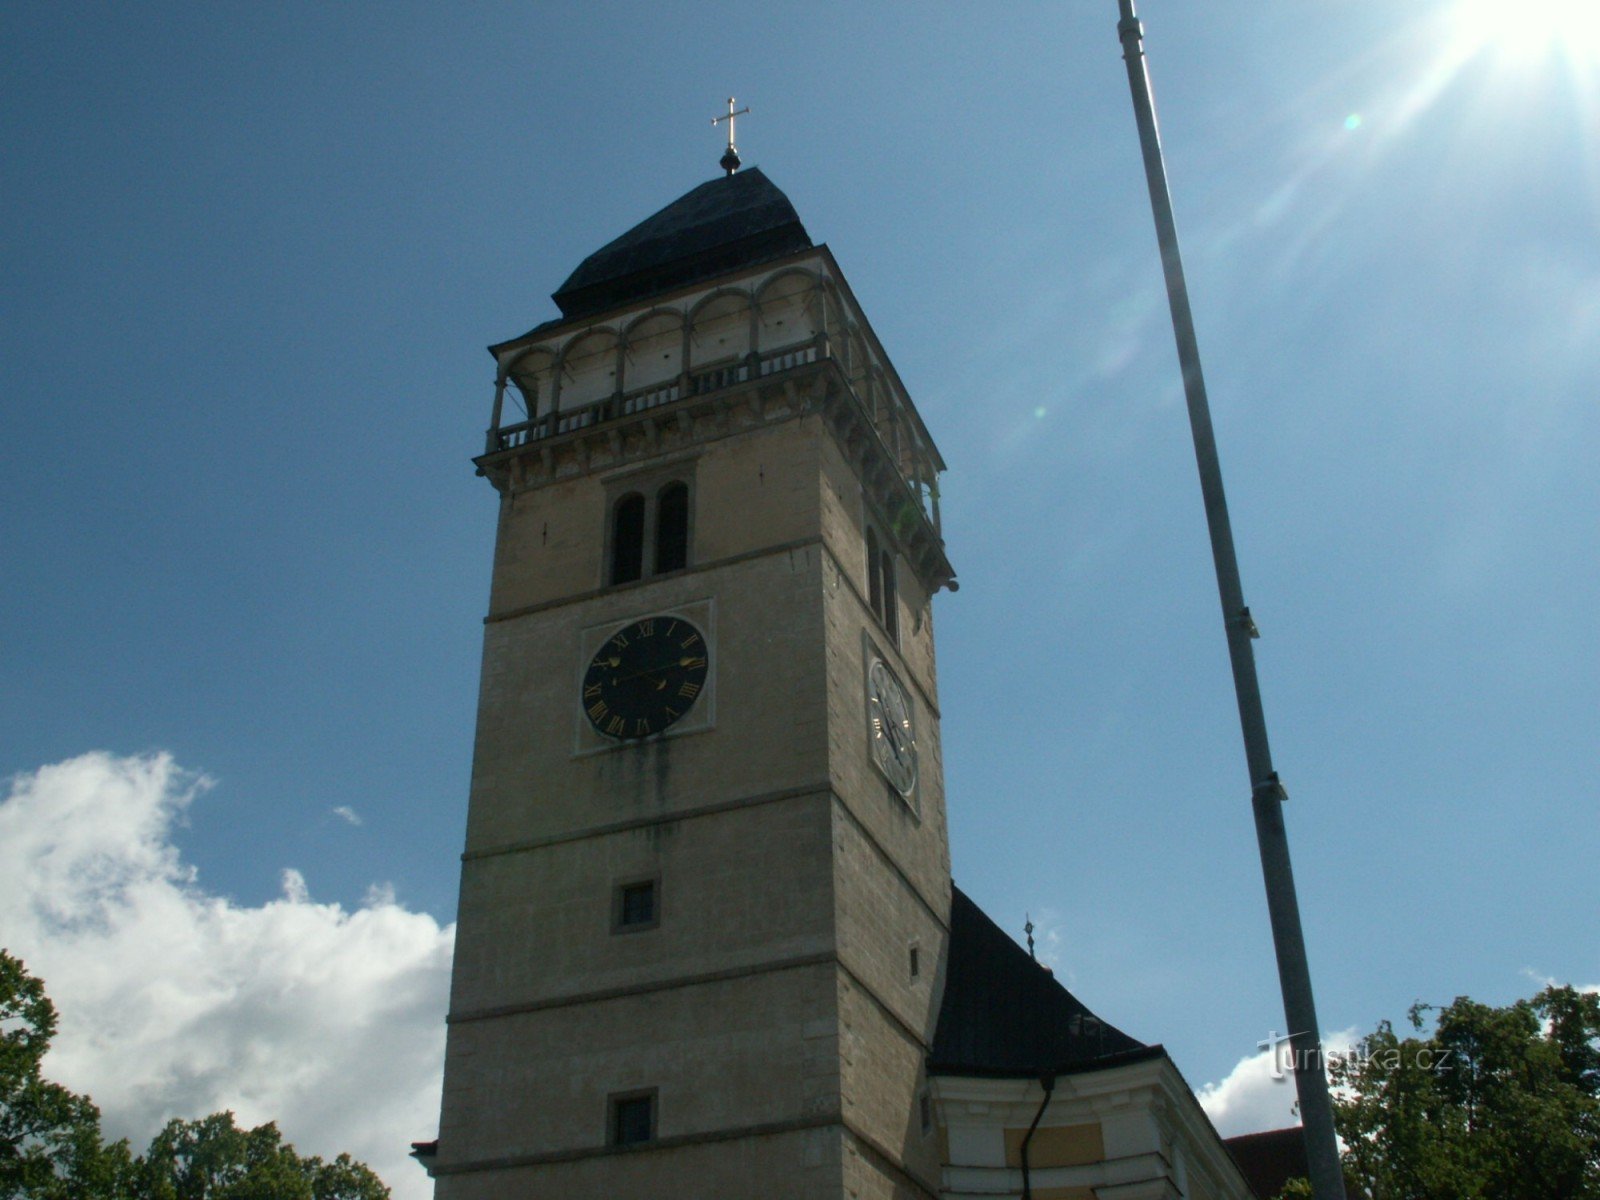 The beautiful Renaissance tower at the church of St. Lawrence in Dačice. After climbing 150 steps to